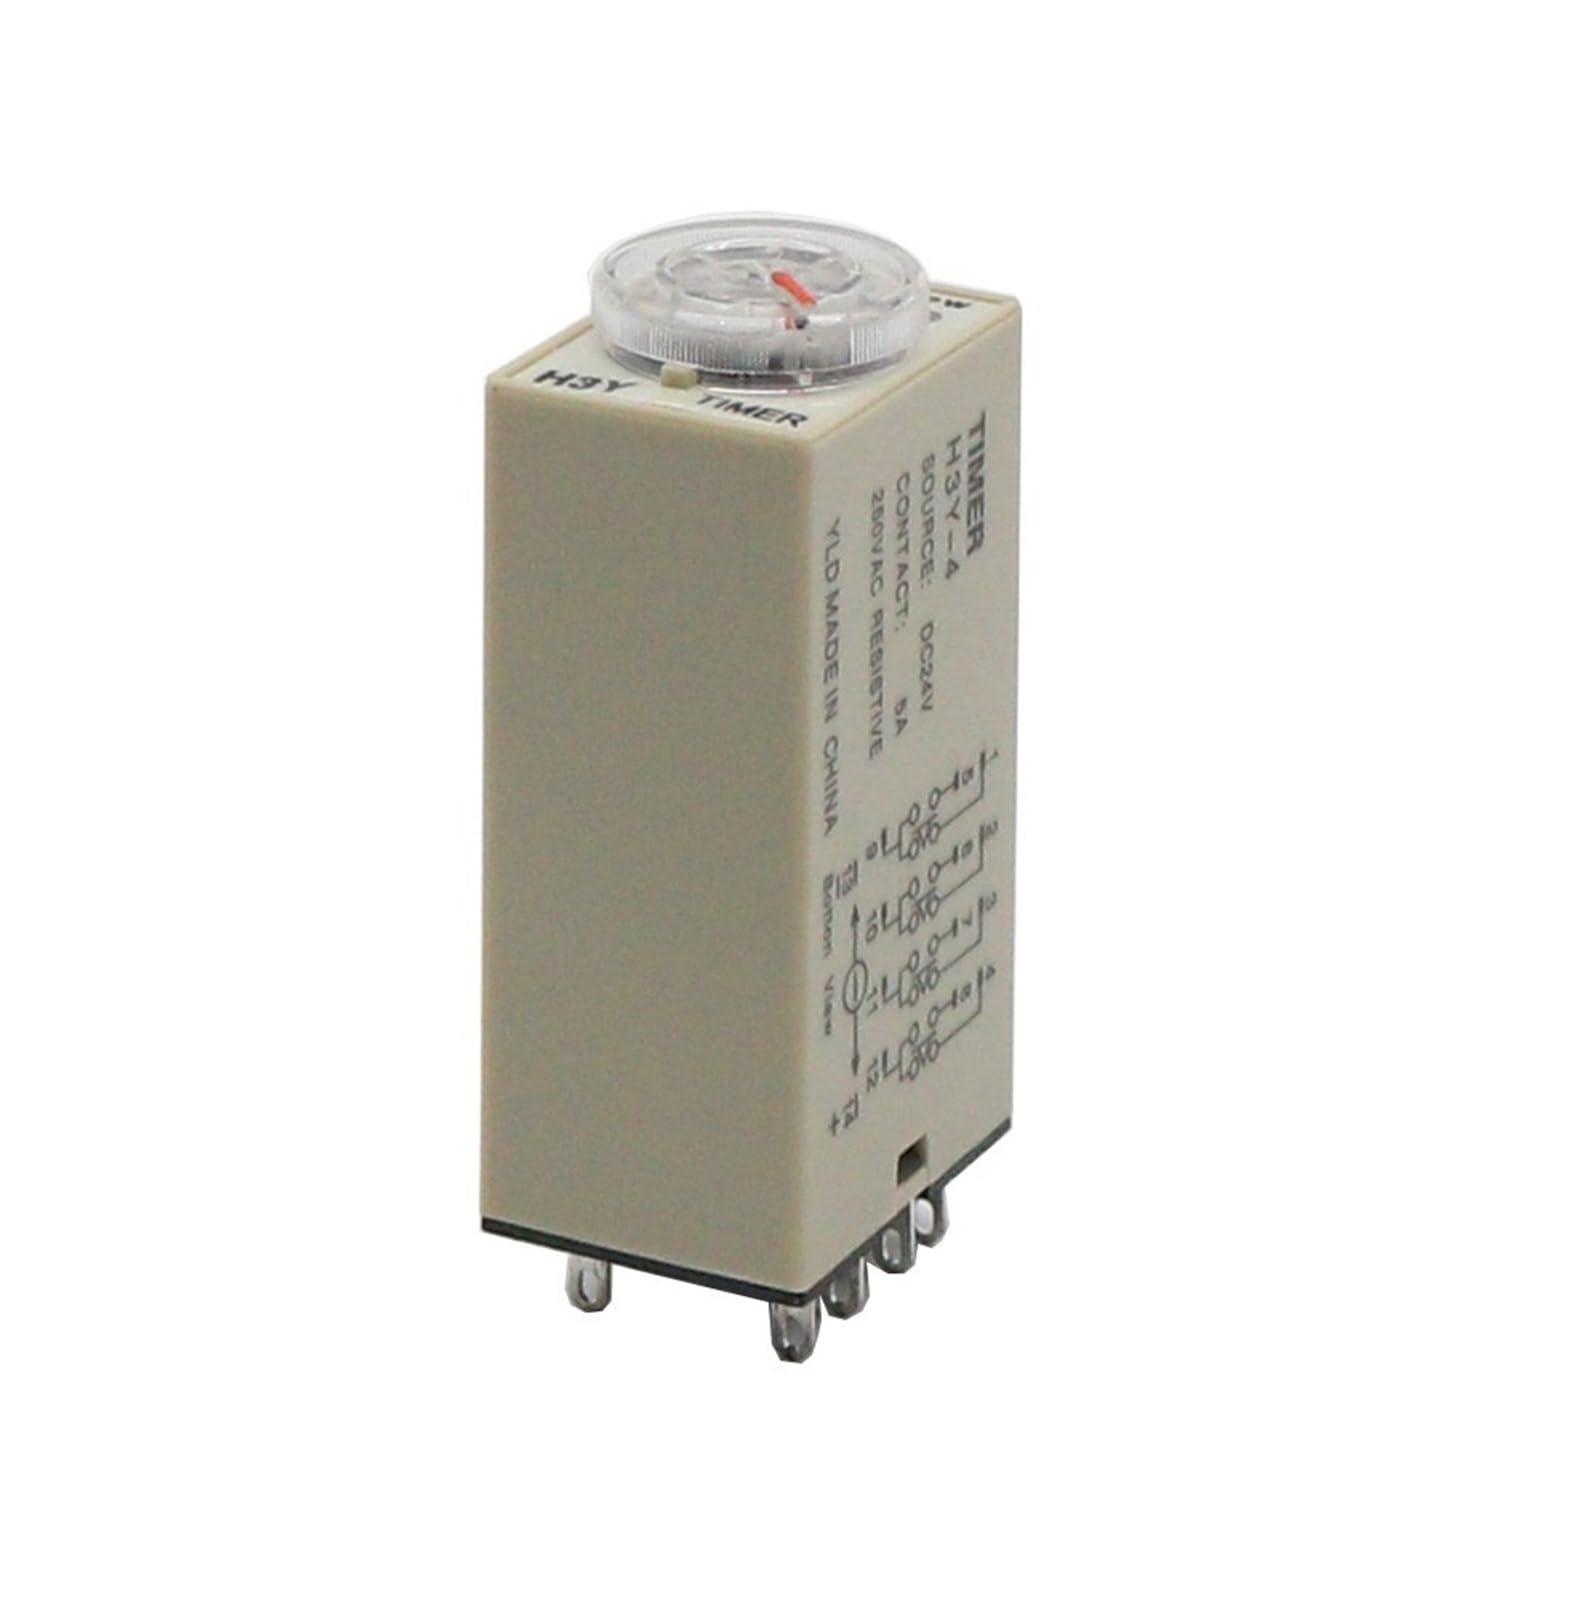 1pcs Power on Delay Time Relay H3Y-4 Small 14-pinDC12V24vAC220v Timer Switch 1S 3S 5S 30S 60S 5M 10M 30M 60M NWPNLXEA(DC 24V,H3Y-4 30Minute) von NWPNLXEA